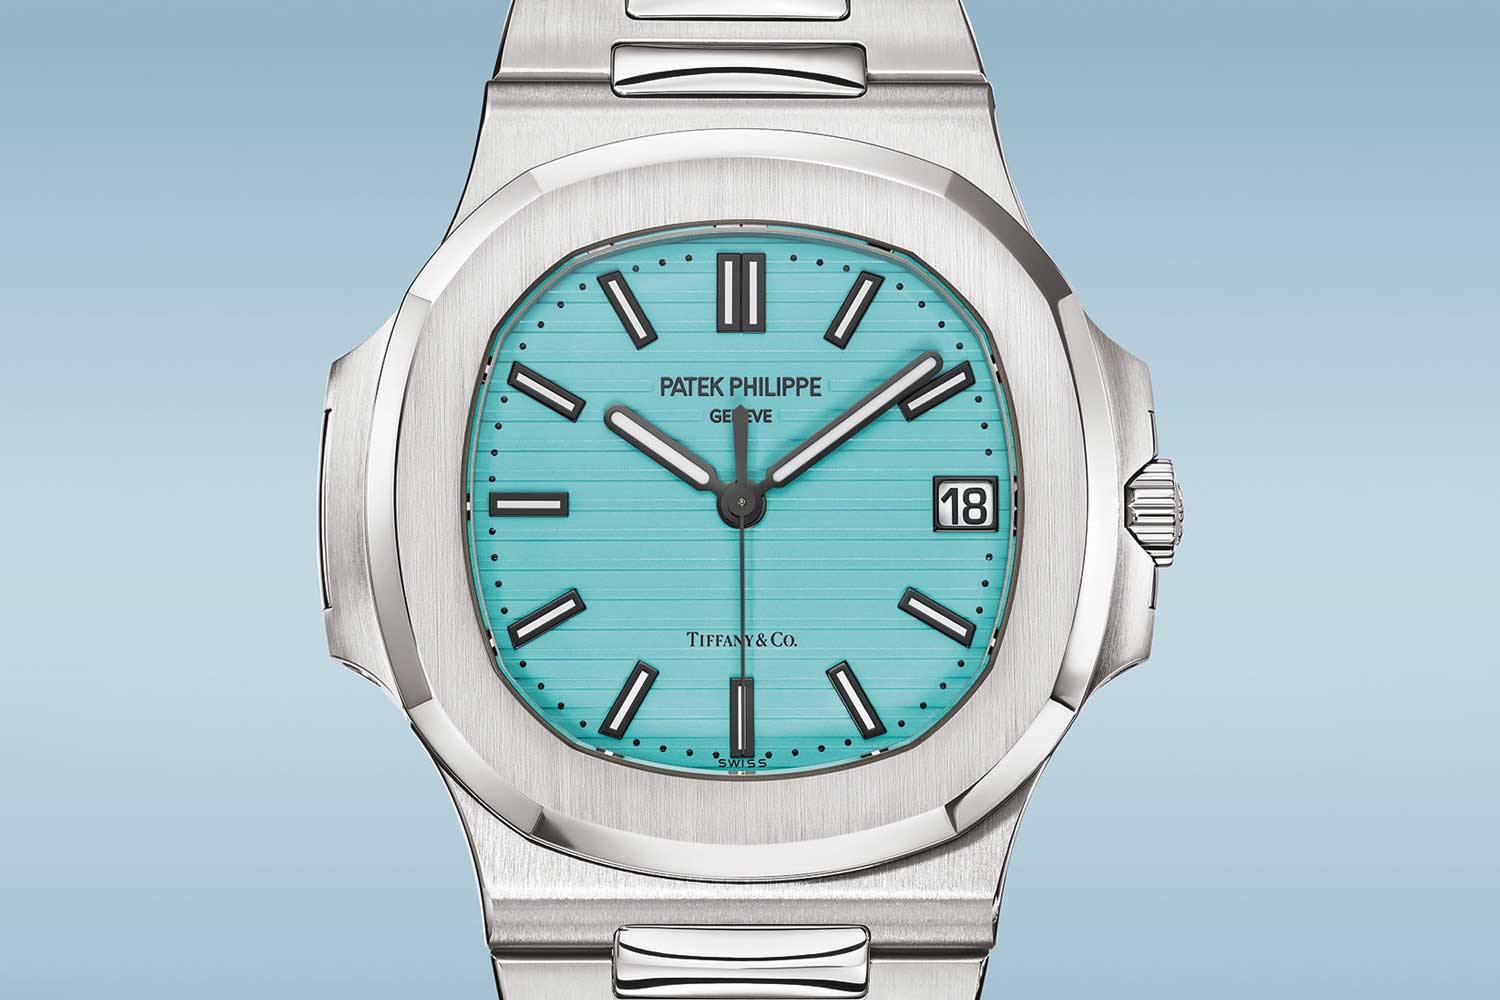 Patek Phillipe has already earmarked one example of the Ref. 5711/1A-018 “Tiffany & Co.” auctioned off by Phillips Watches at their 2021 New York Auction (11-12 December 2021); the watch is to be sold with no reserve (Image: phillips.com)